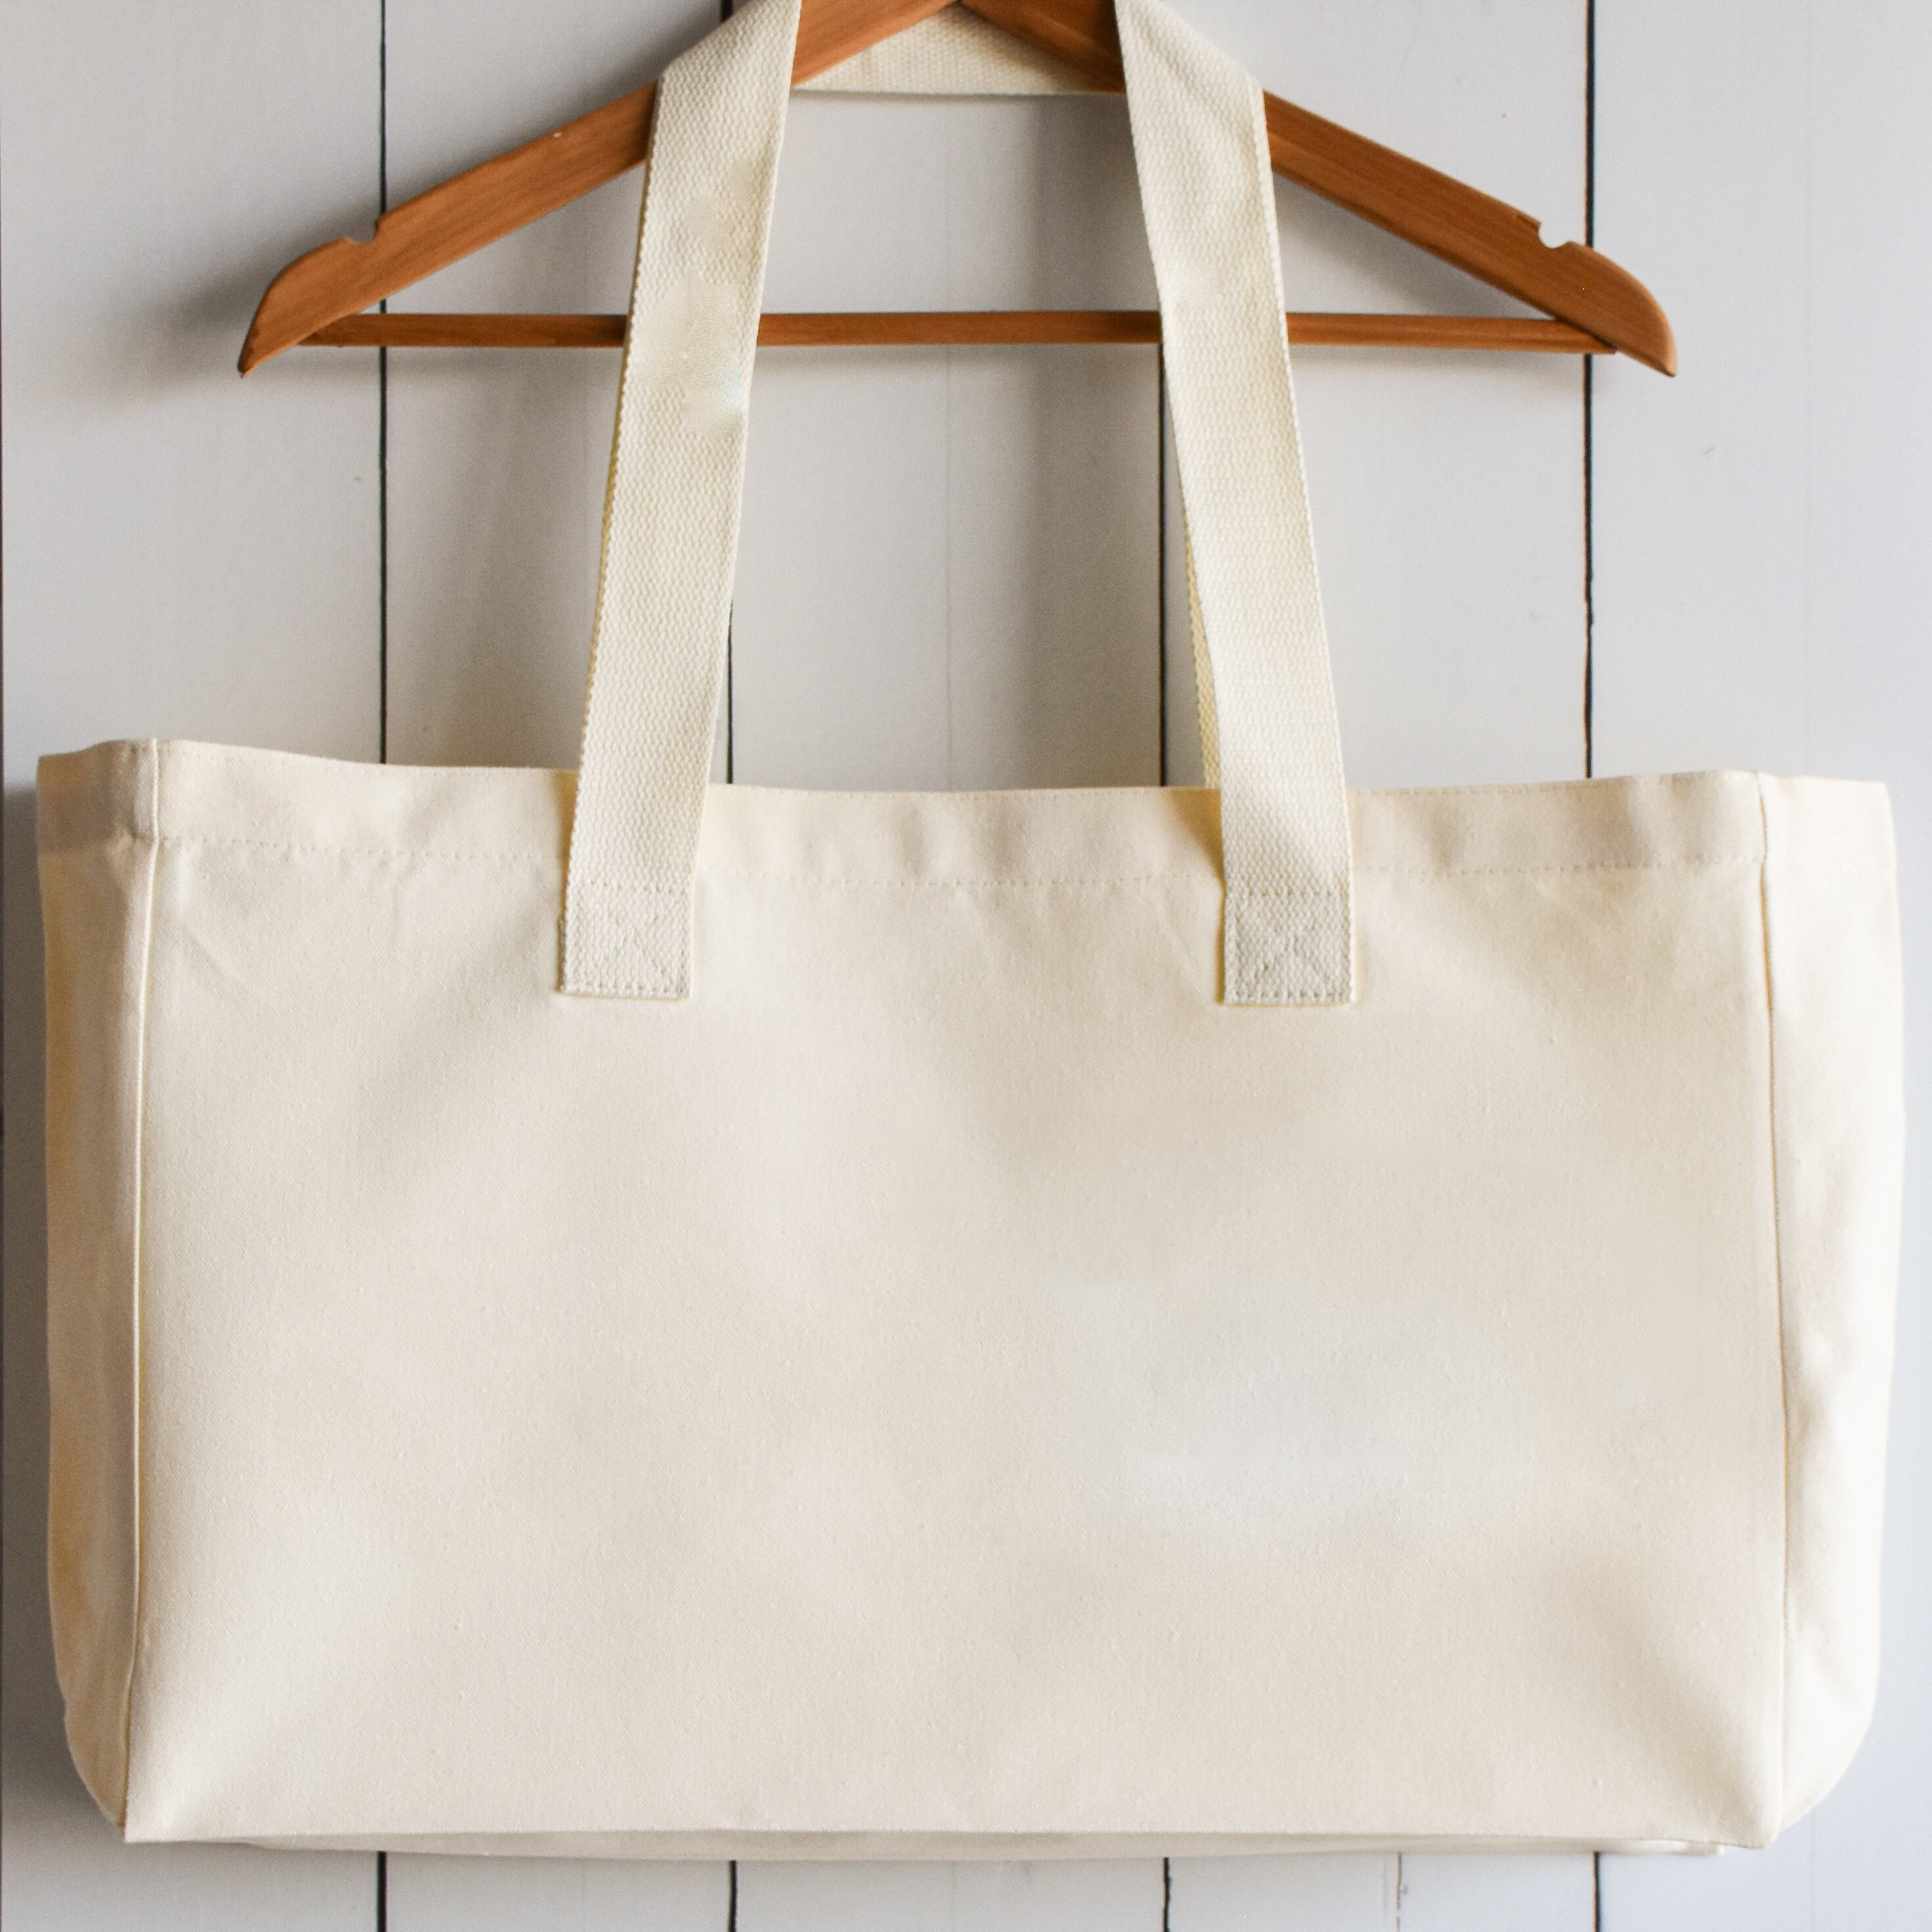 Large Canvas Tote Bag, Canvas Tote Bag With Zipper Blank Canvas